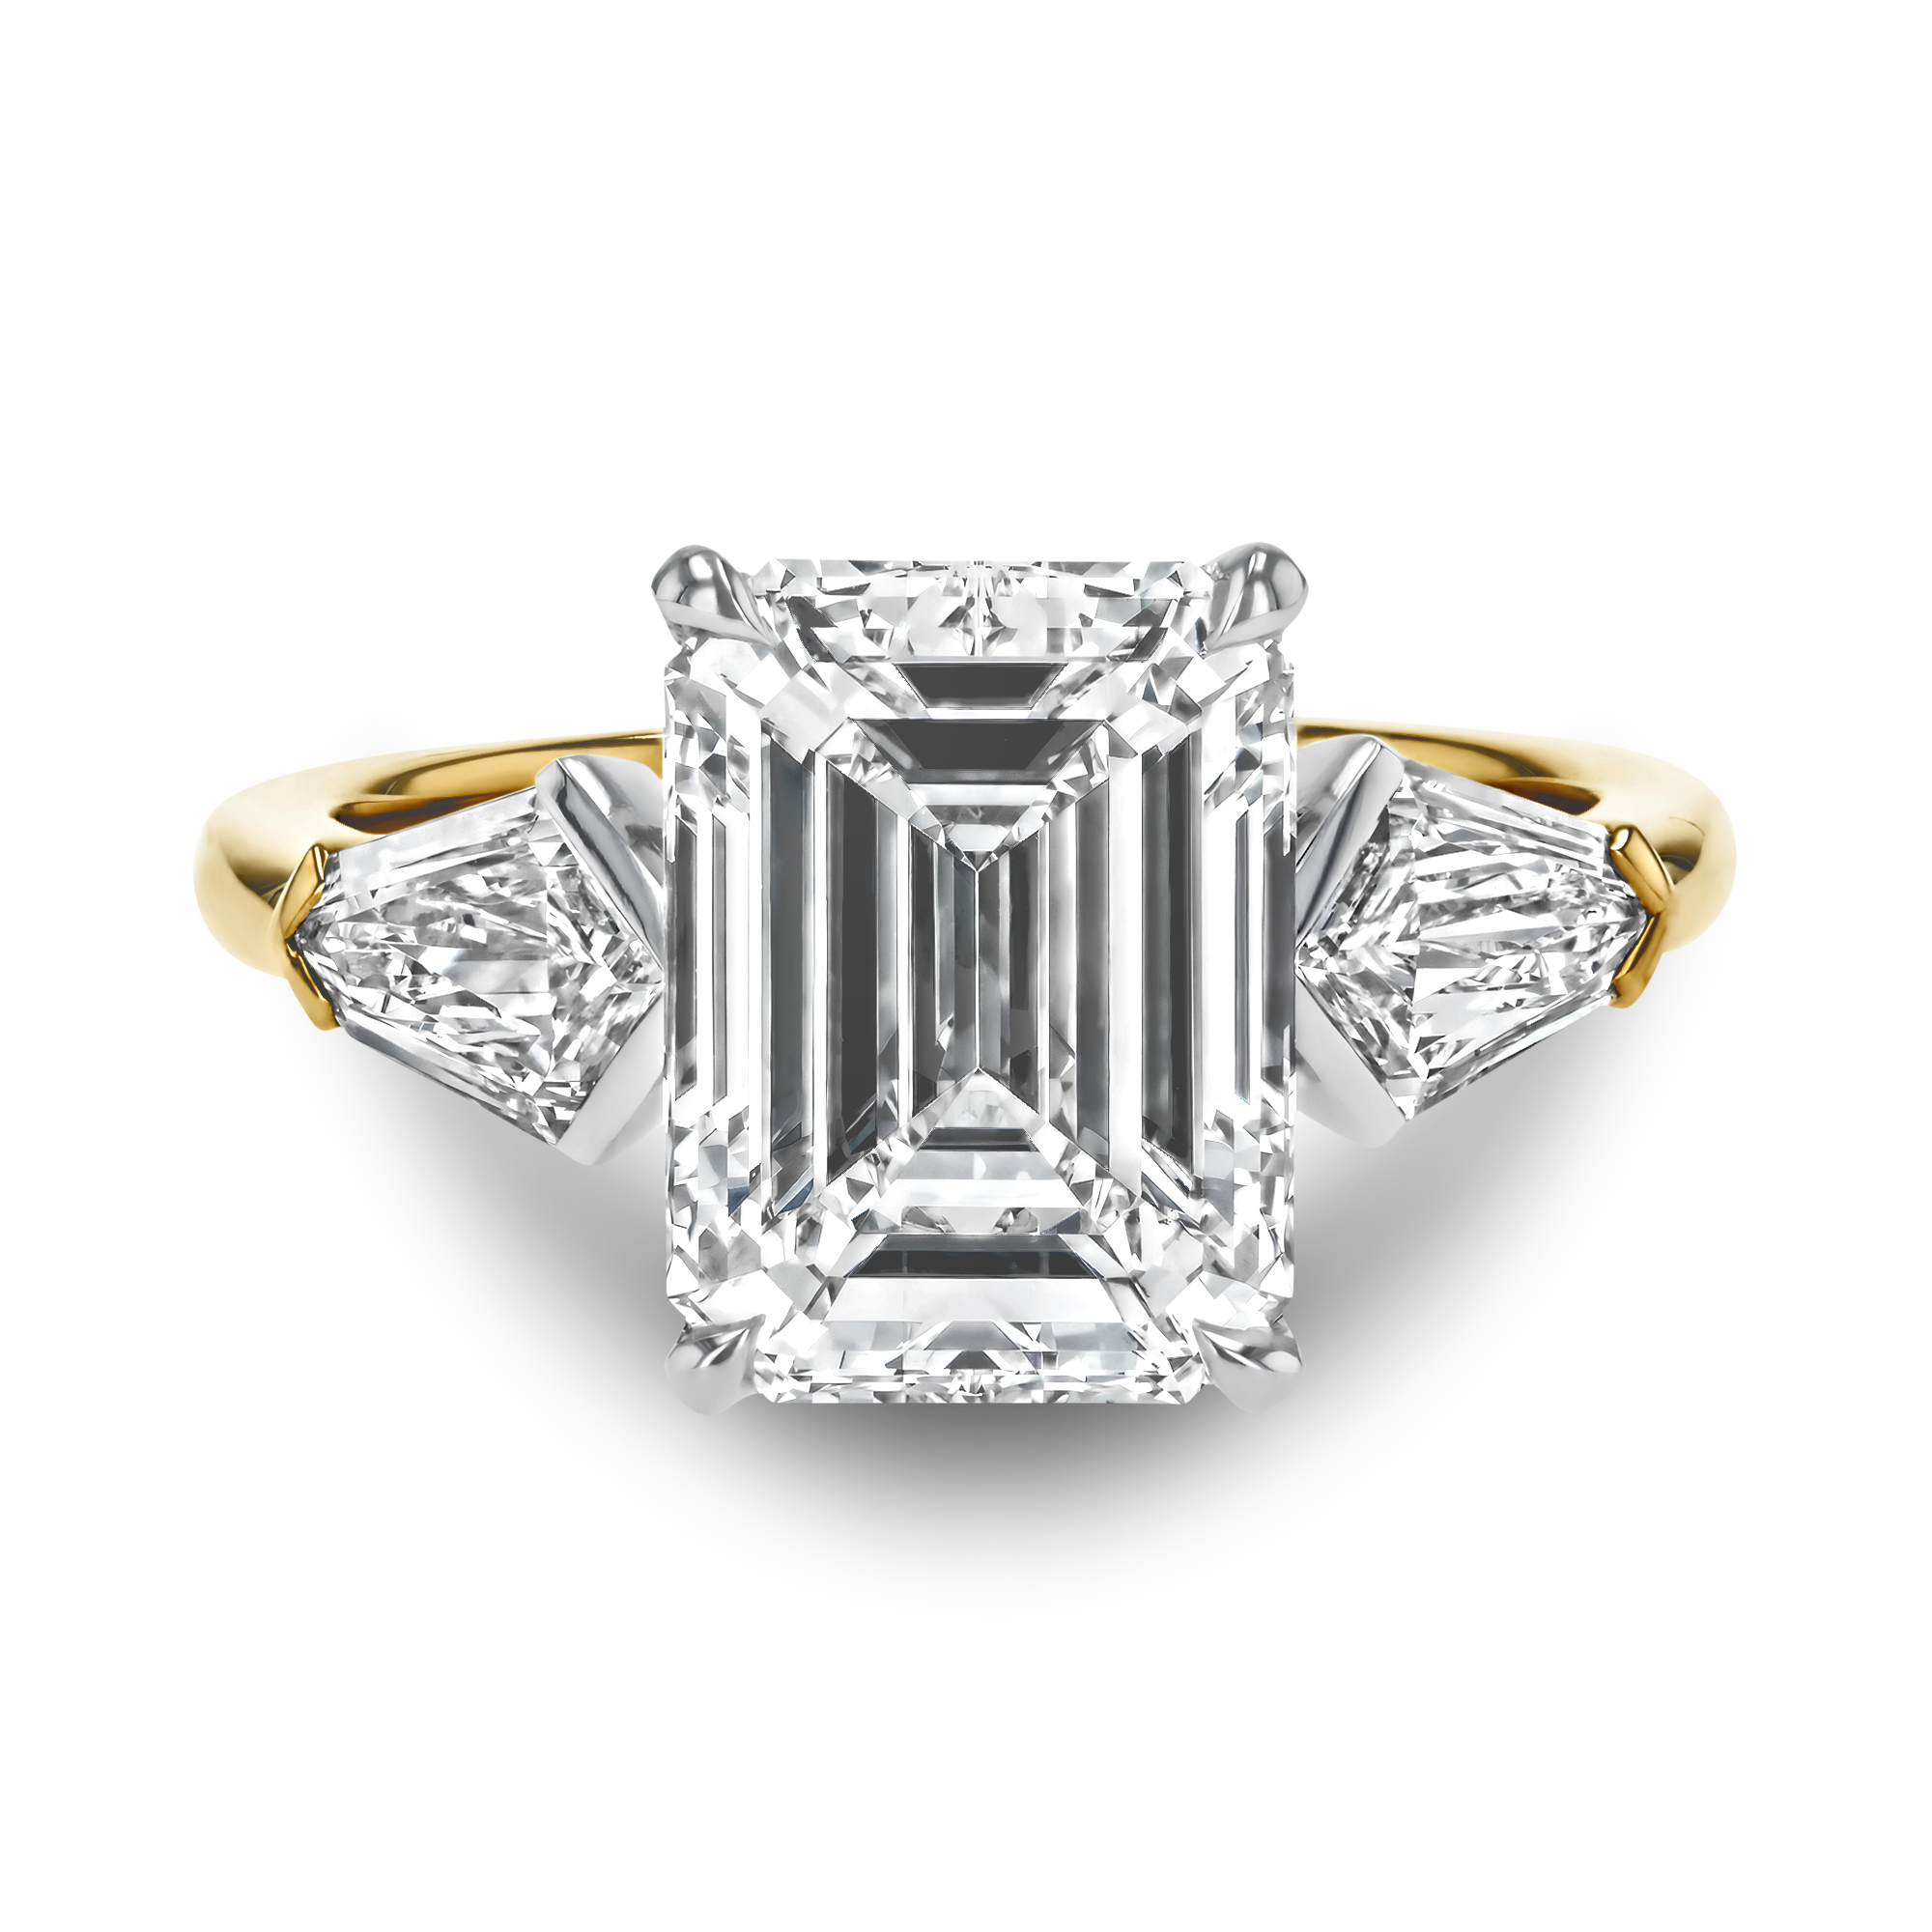 Kite Setting 4.04ct Diamond Solitaire Ring Emerald Cut, Claw Set_2